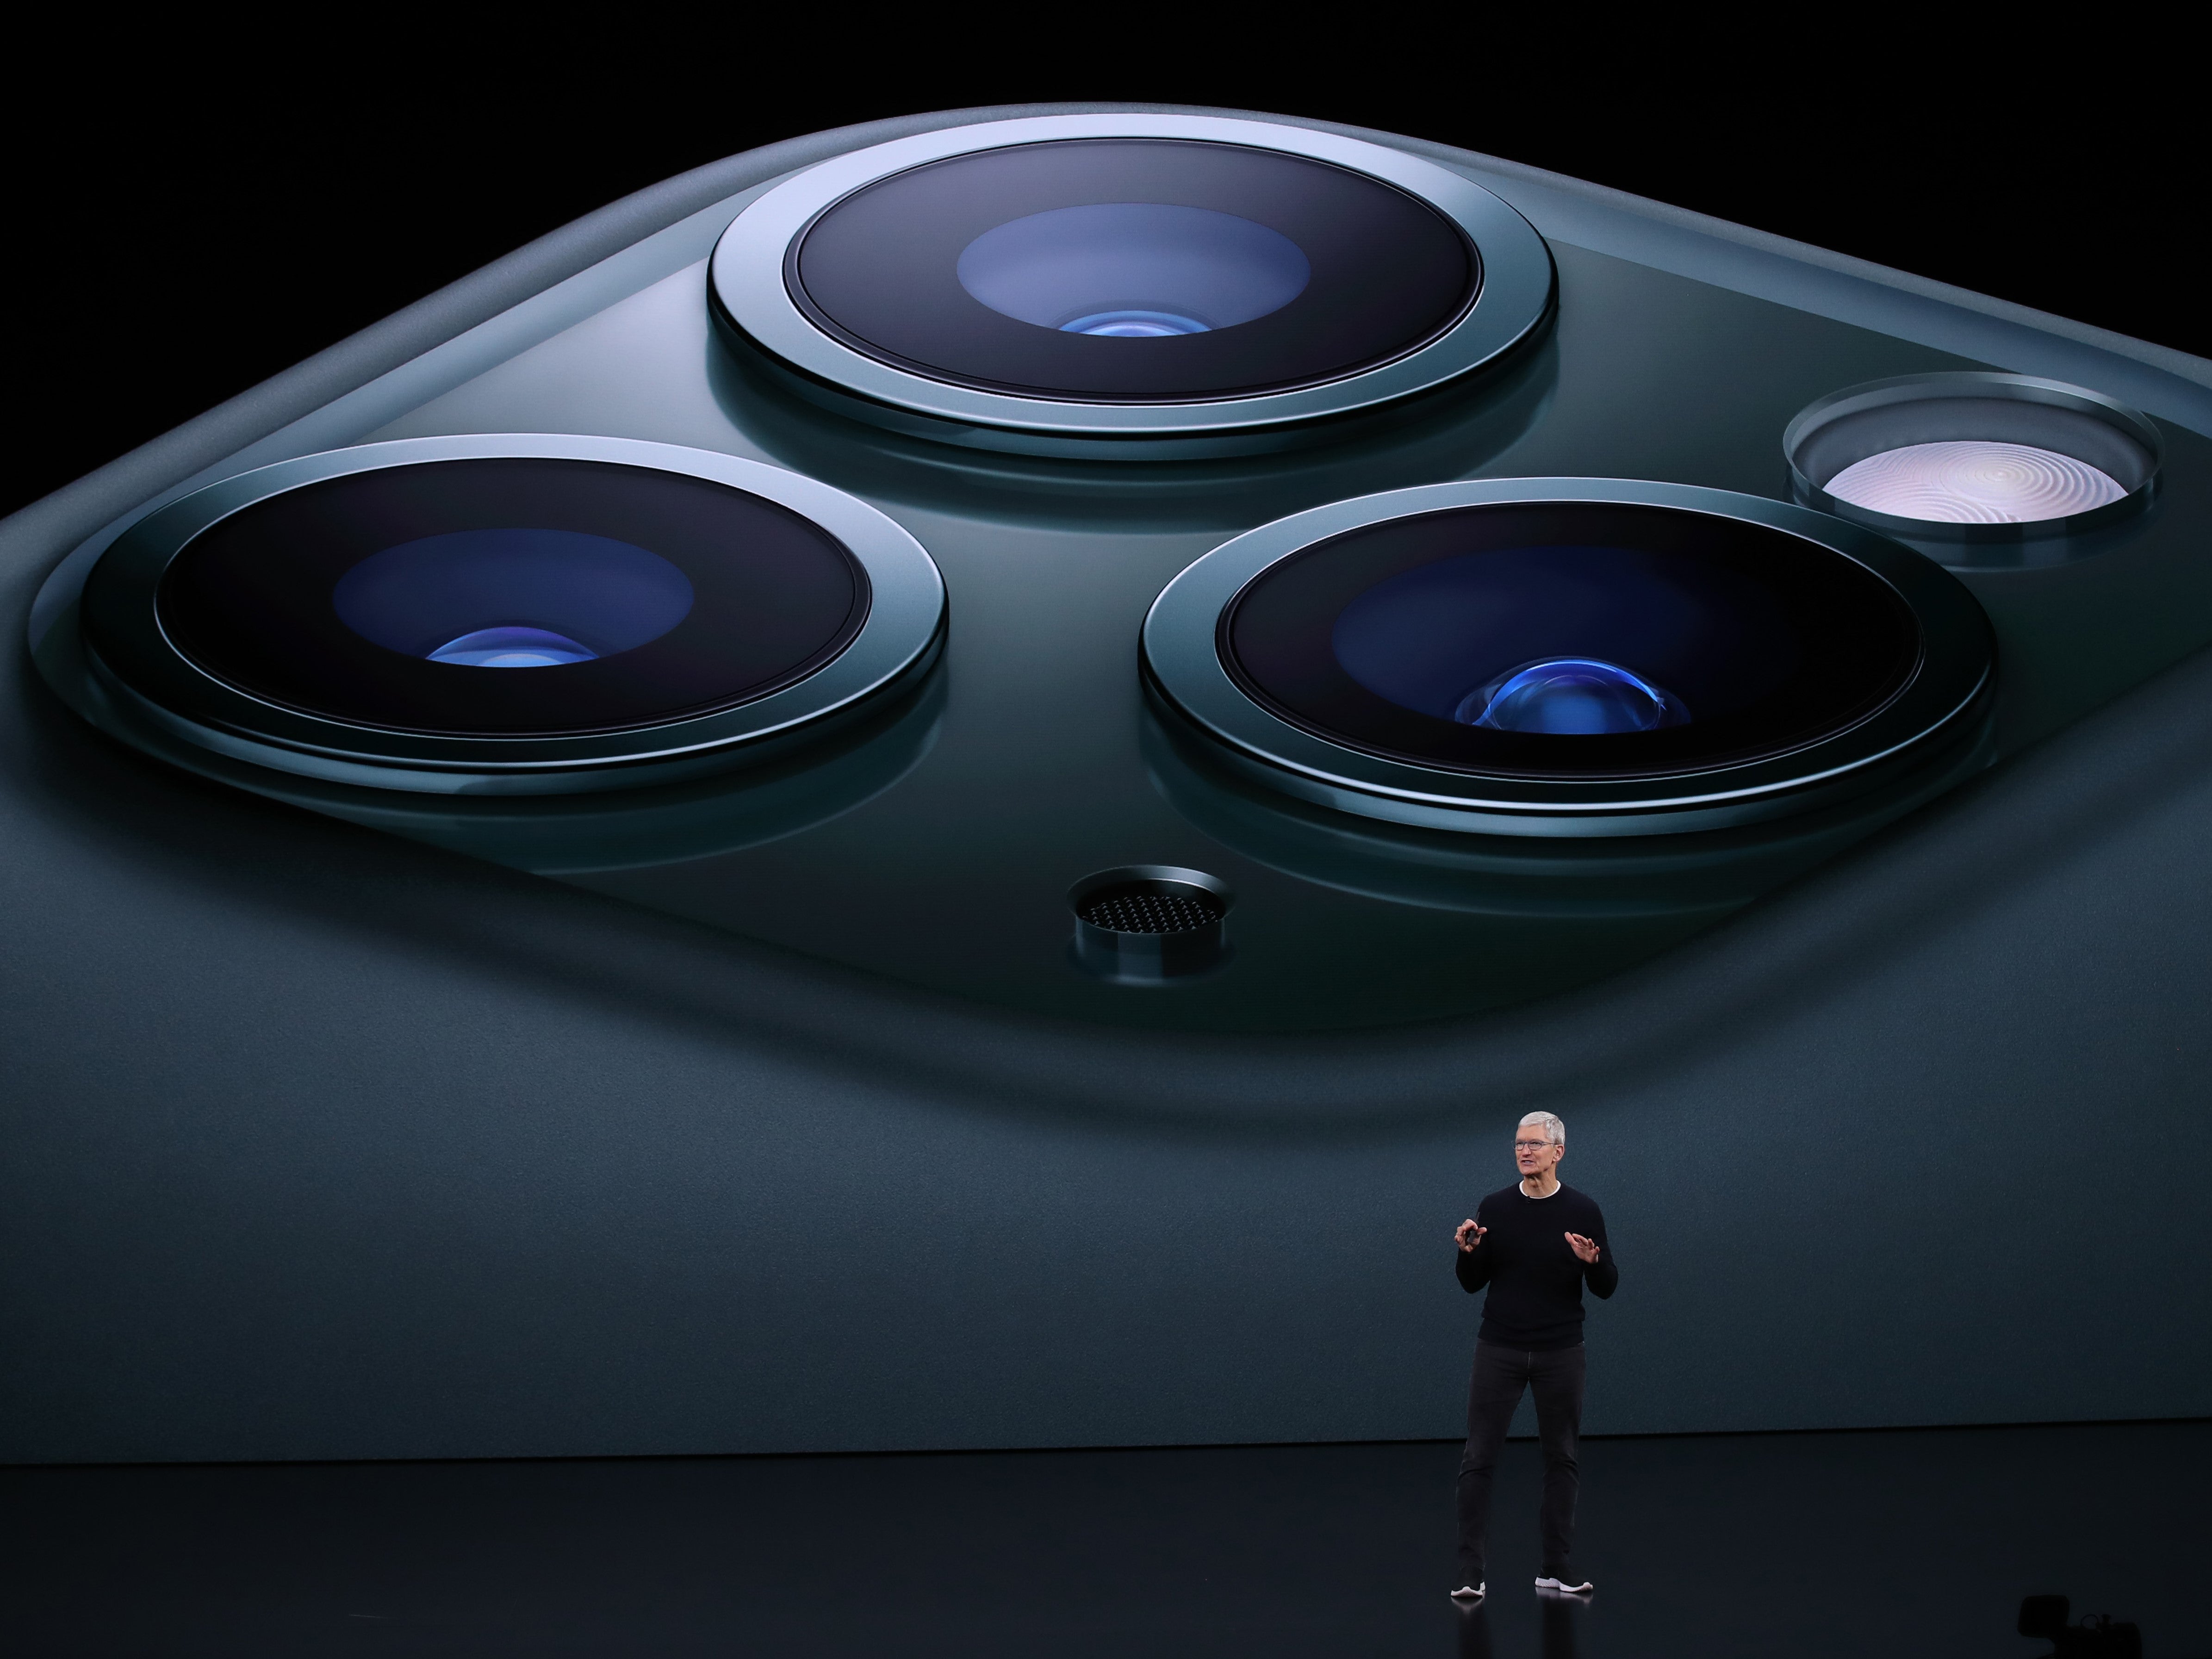 Apple CEO Tim Cook unveils the iPhone 11 Pro during the 2019 event in Cupertino, California